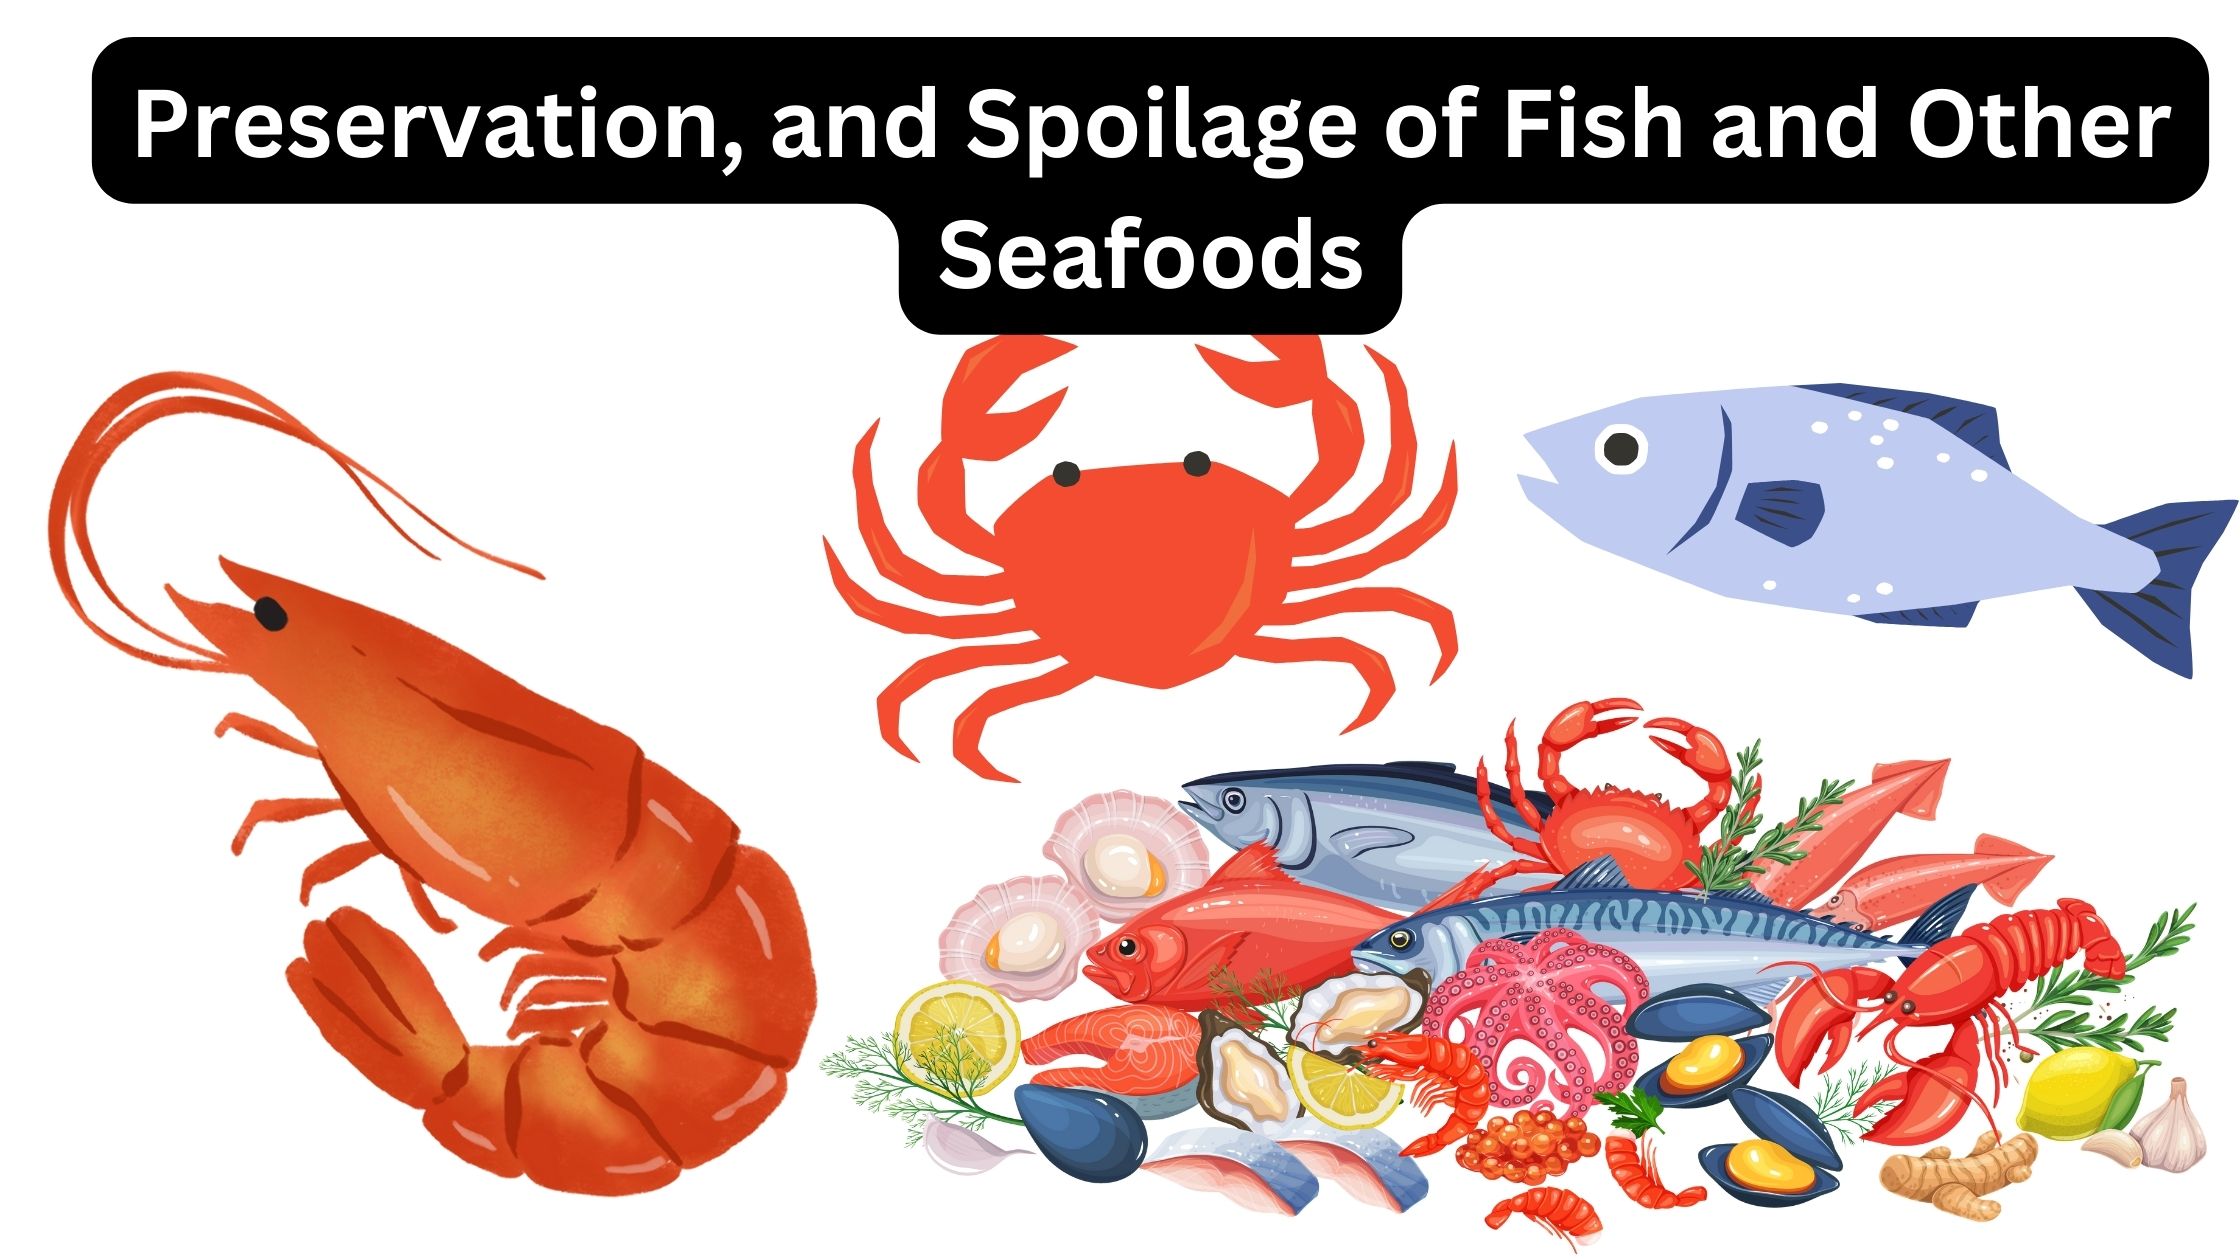 Preservation, and Spoilage of Fish and Other Seafoods